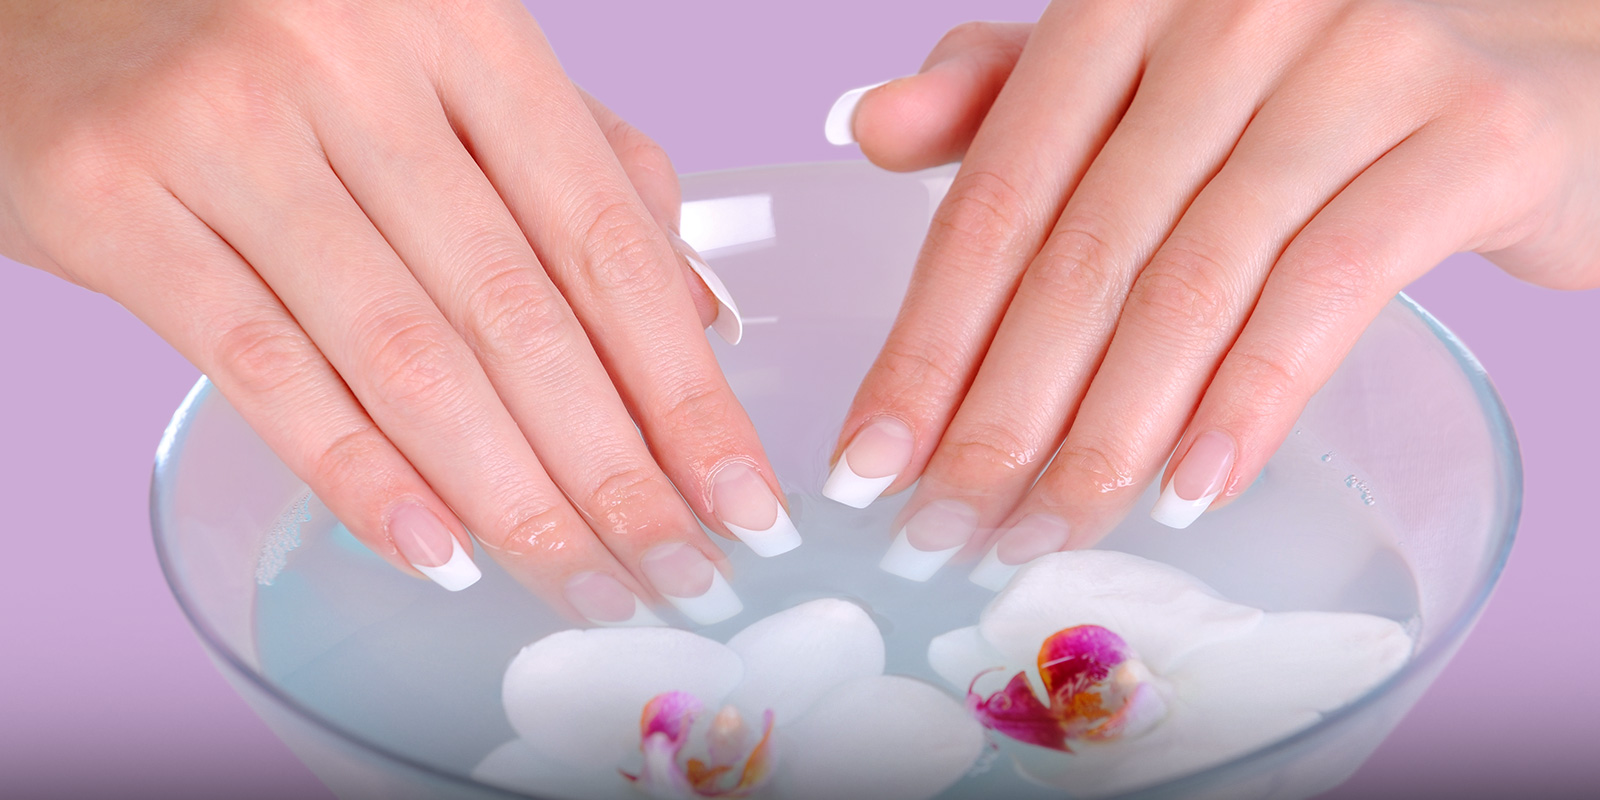 How to Moisturize Nails: The 4 Best Ways to Do So